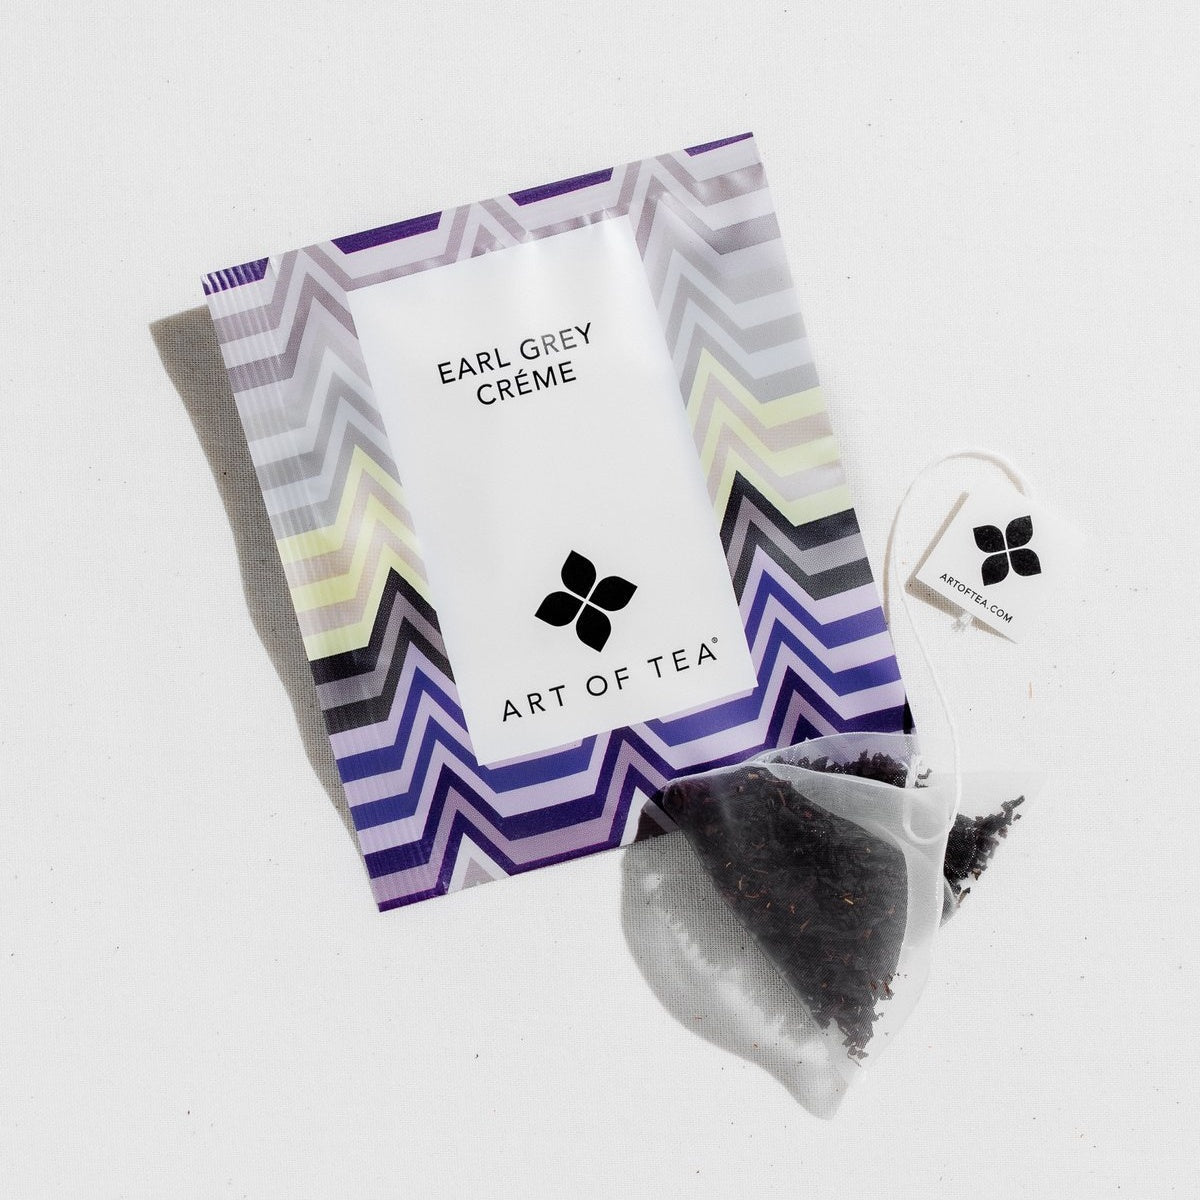 Packet with grey, cream, and purple triangular lines, with tea sachet off to the side.